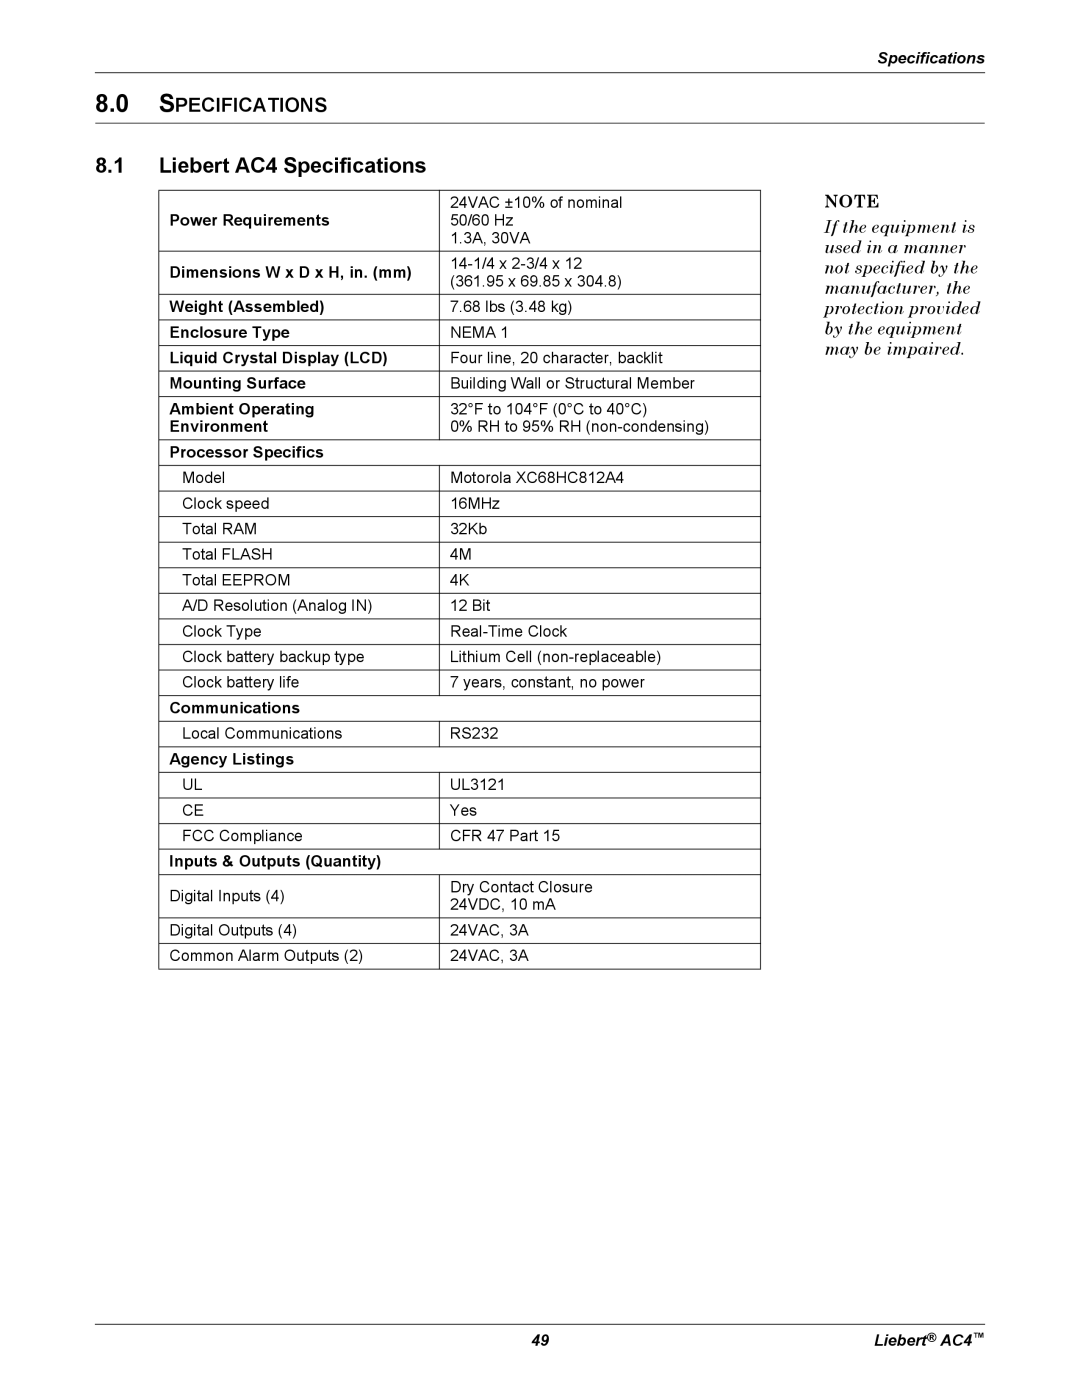 Emerson user manual 8.1Liebert AC4 Specifications, 8.0SPECIFICATIONS 